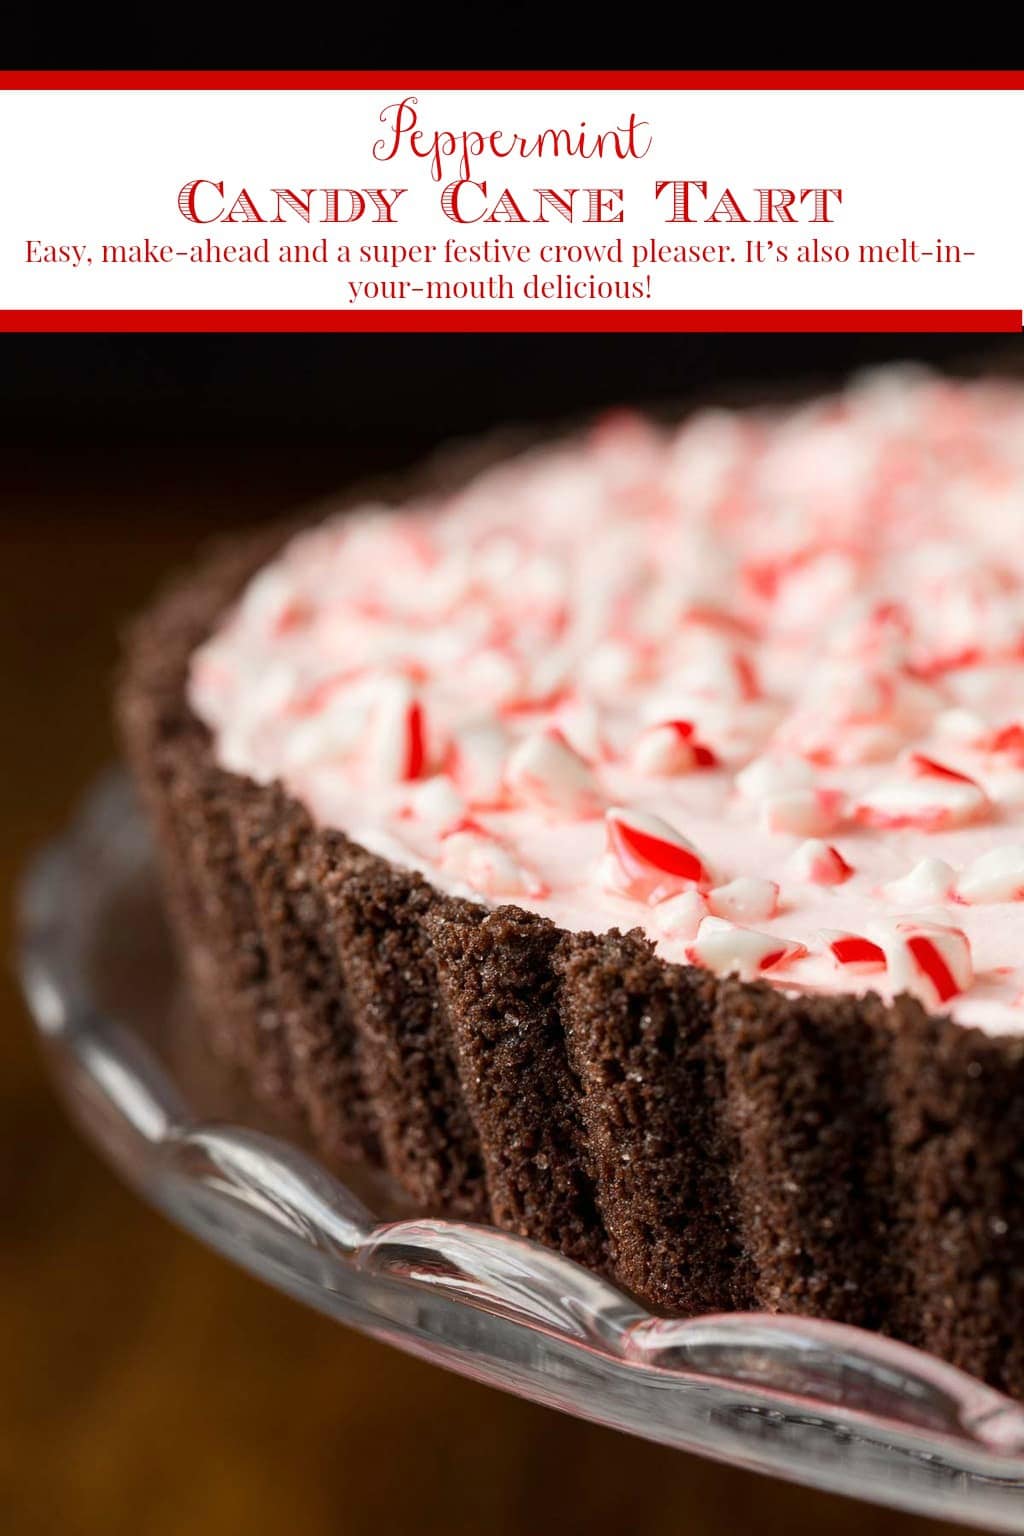 Peppermint Candy Cane Tart - a fabulously festive, crowd-pleaser!